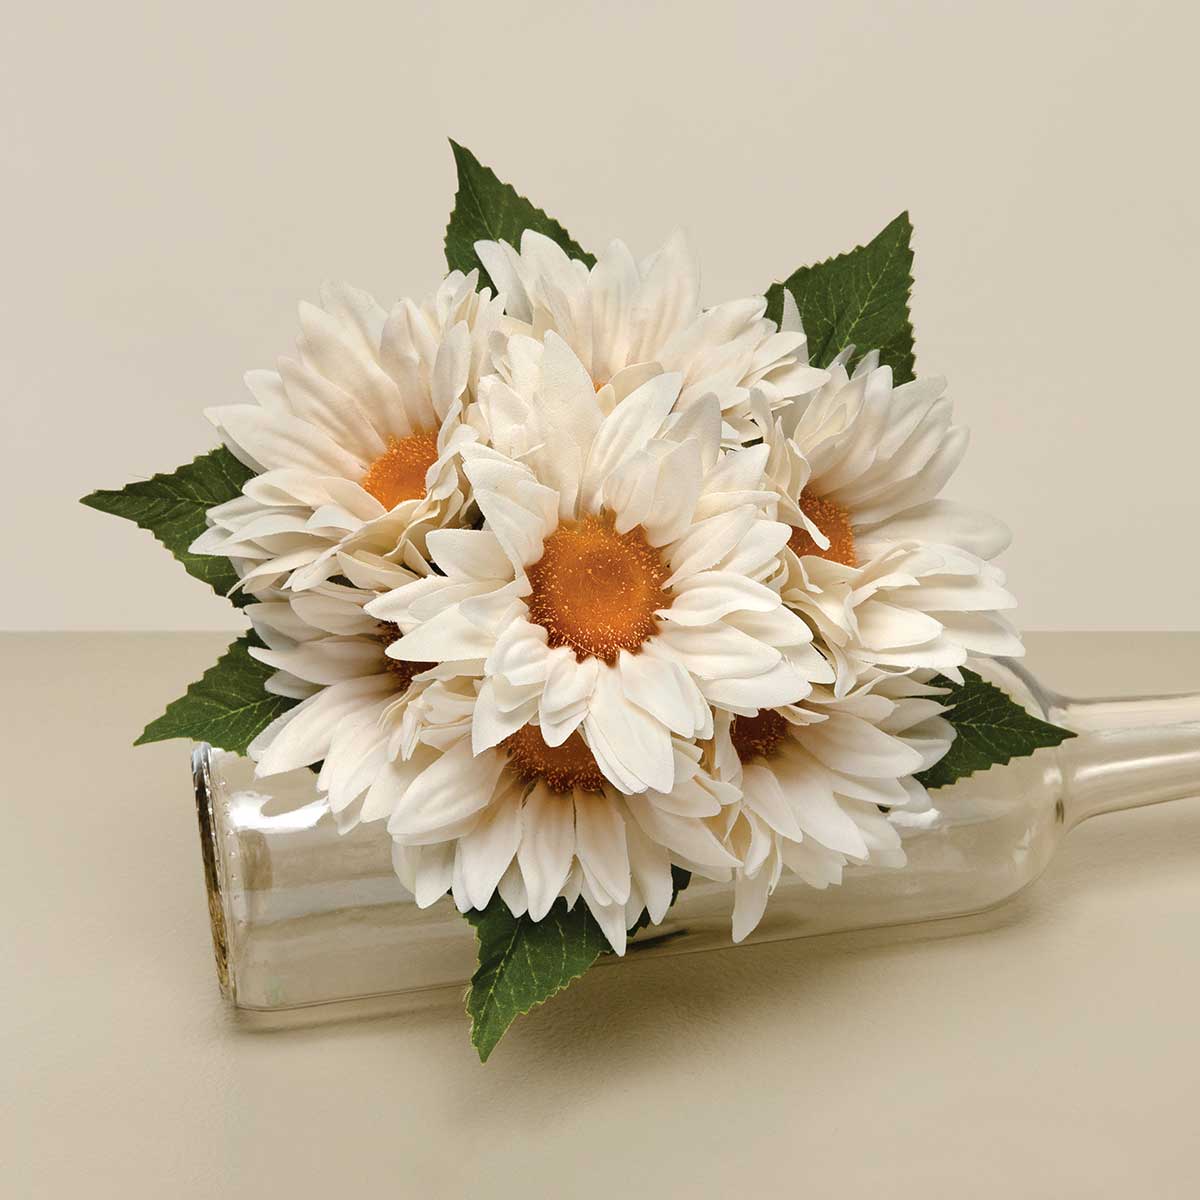 BOUQUET OF 7 SUNFLOWER CREAM 9IN X 10IN (4IN HEAD) - Click Image to Close